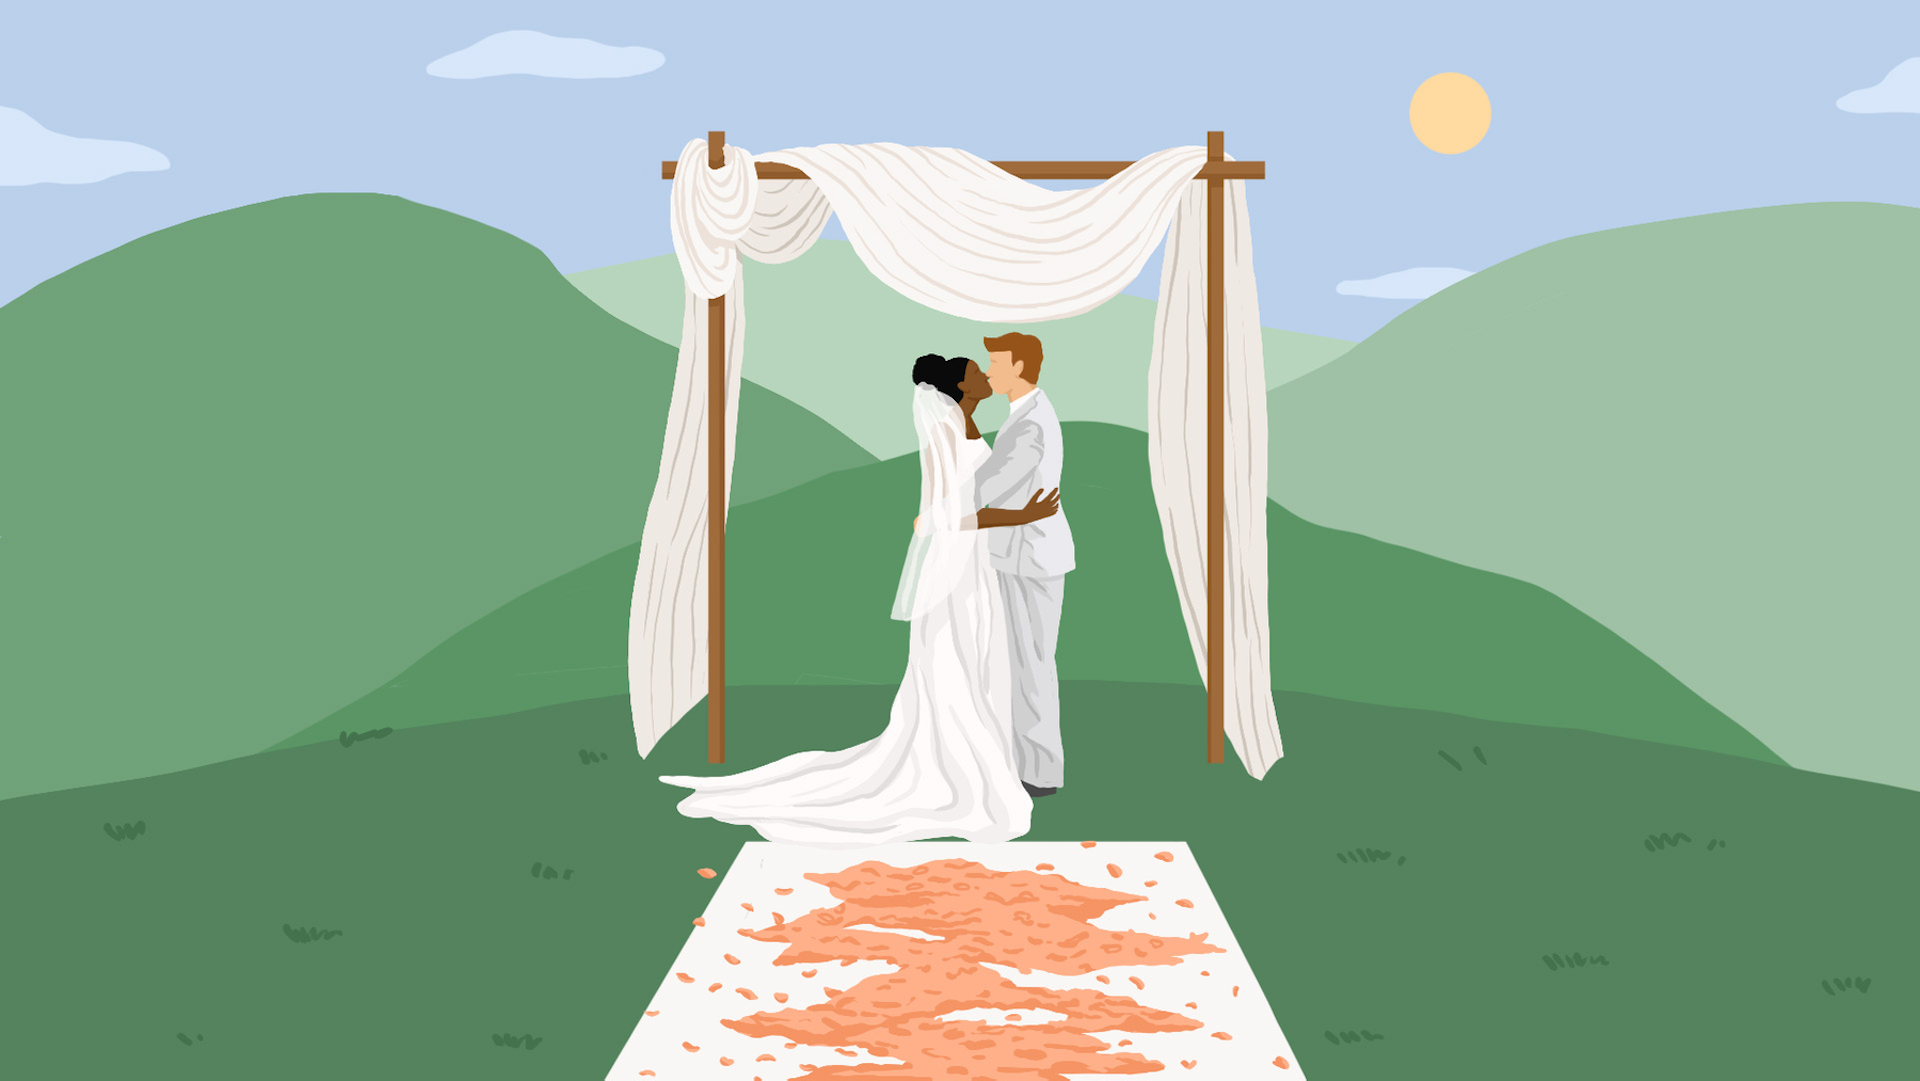 Illustration of bride and groom kissing under a wedding canopy in the mountains.